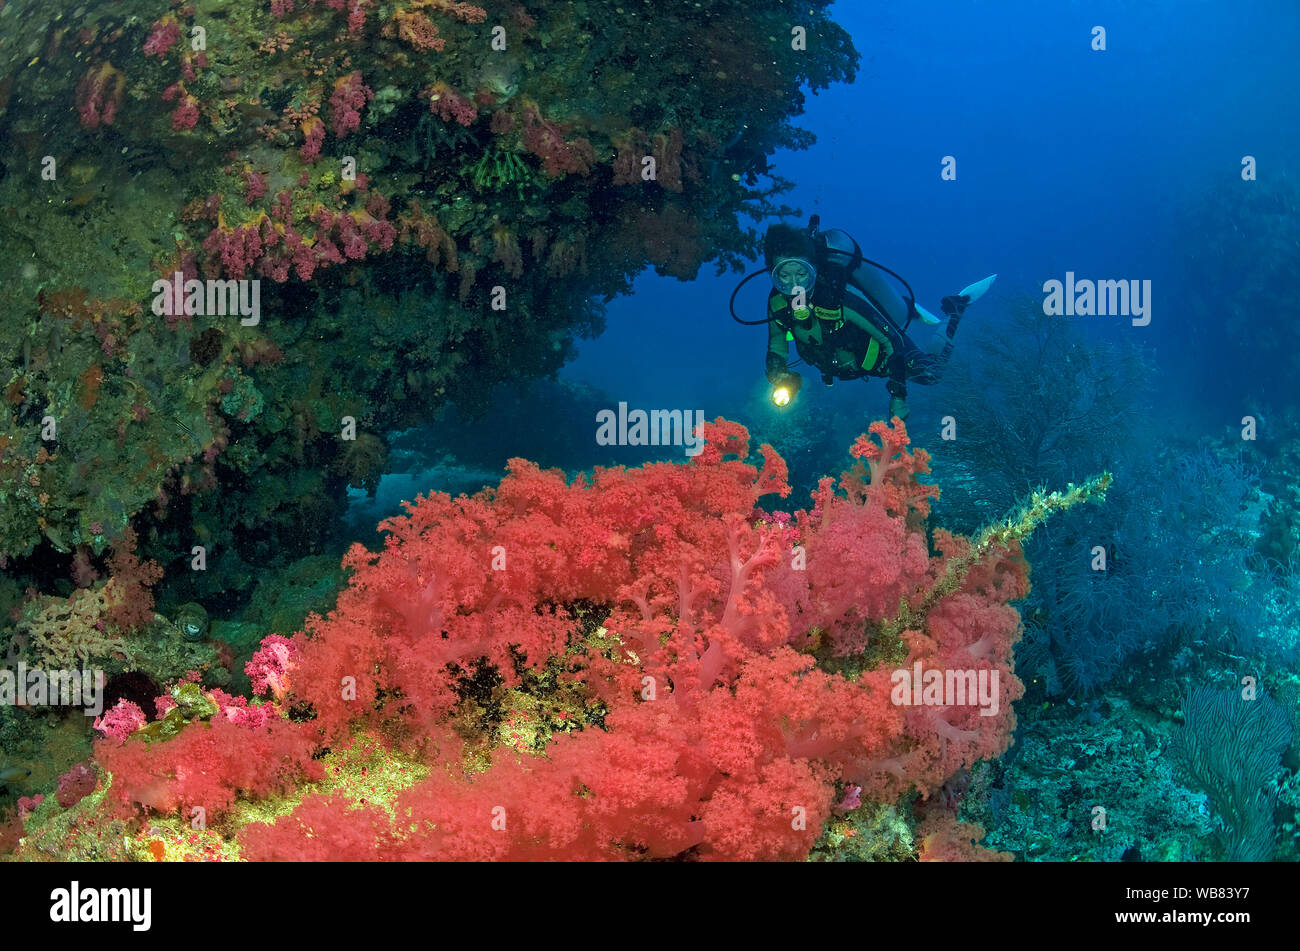 Scuba diver in a coral reef with red soft corals (Nephtheidae), Malapascua, Cebu, Philippines Stock Photo